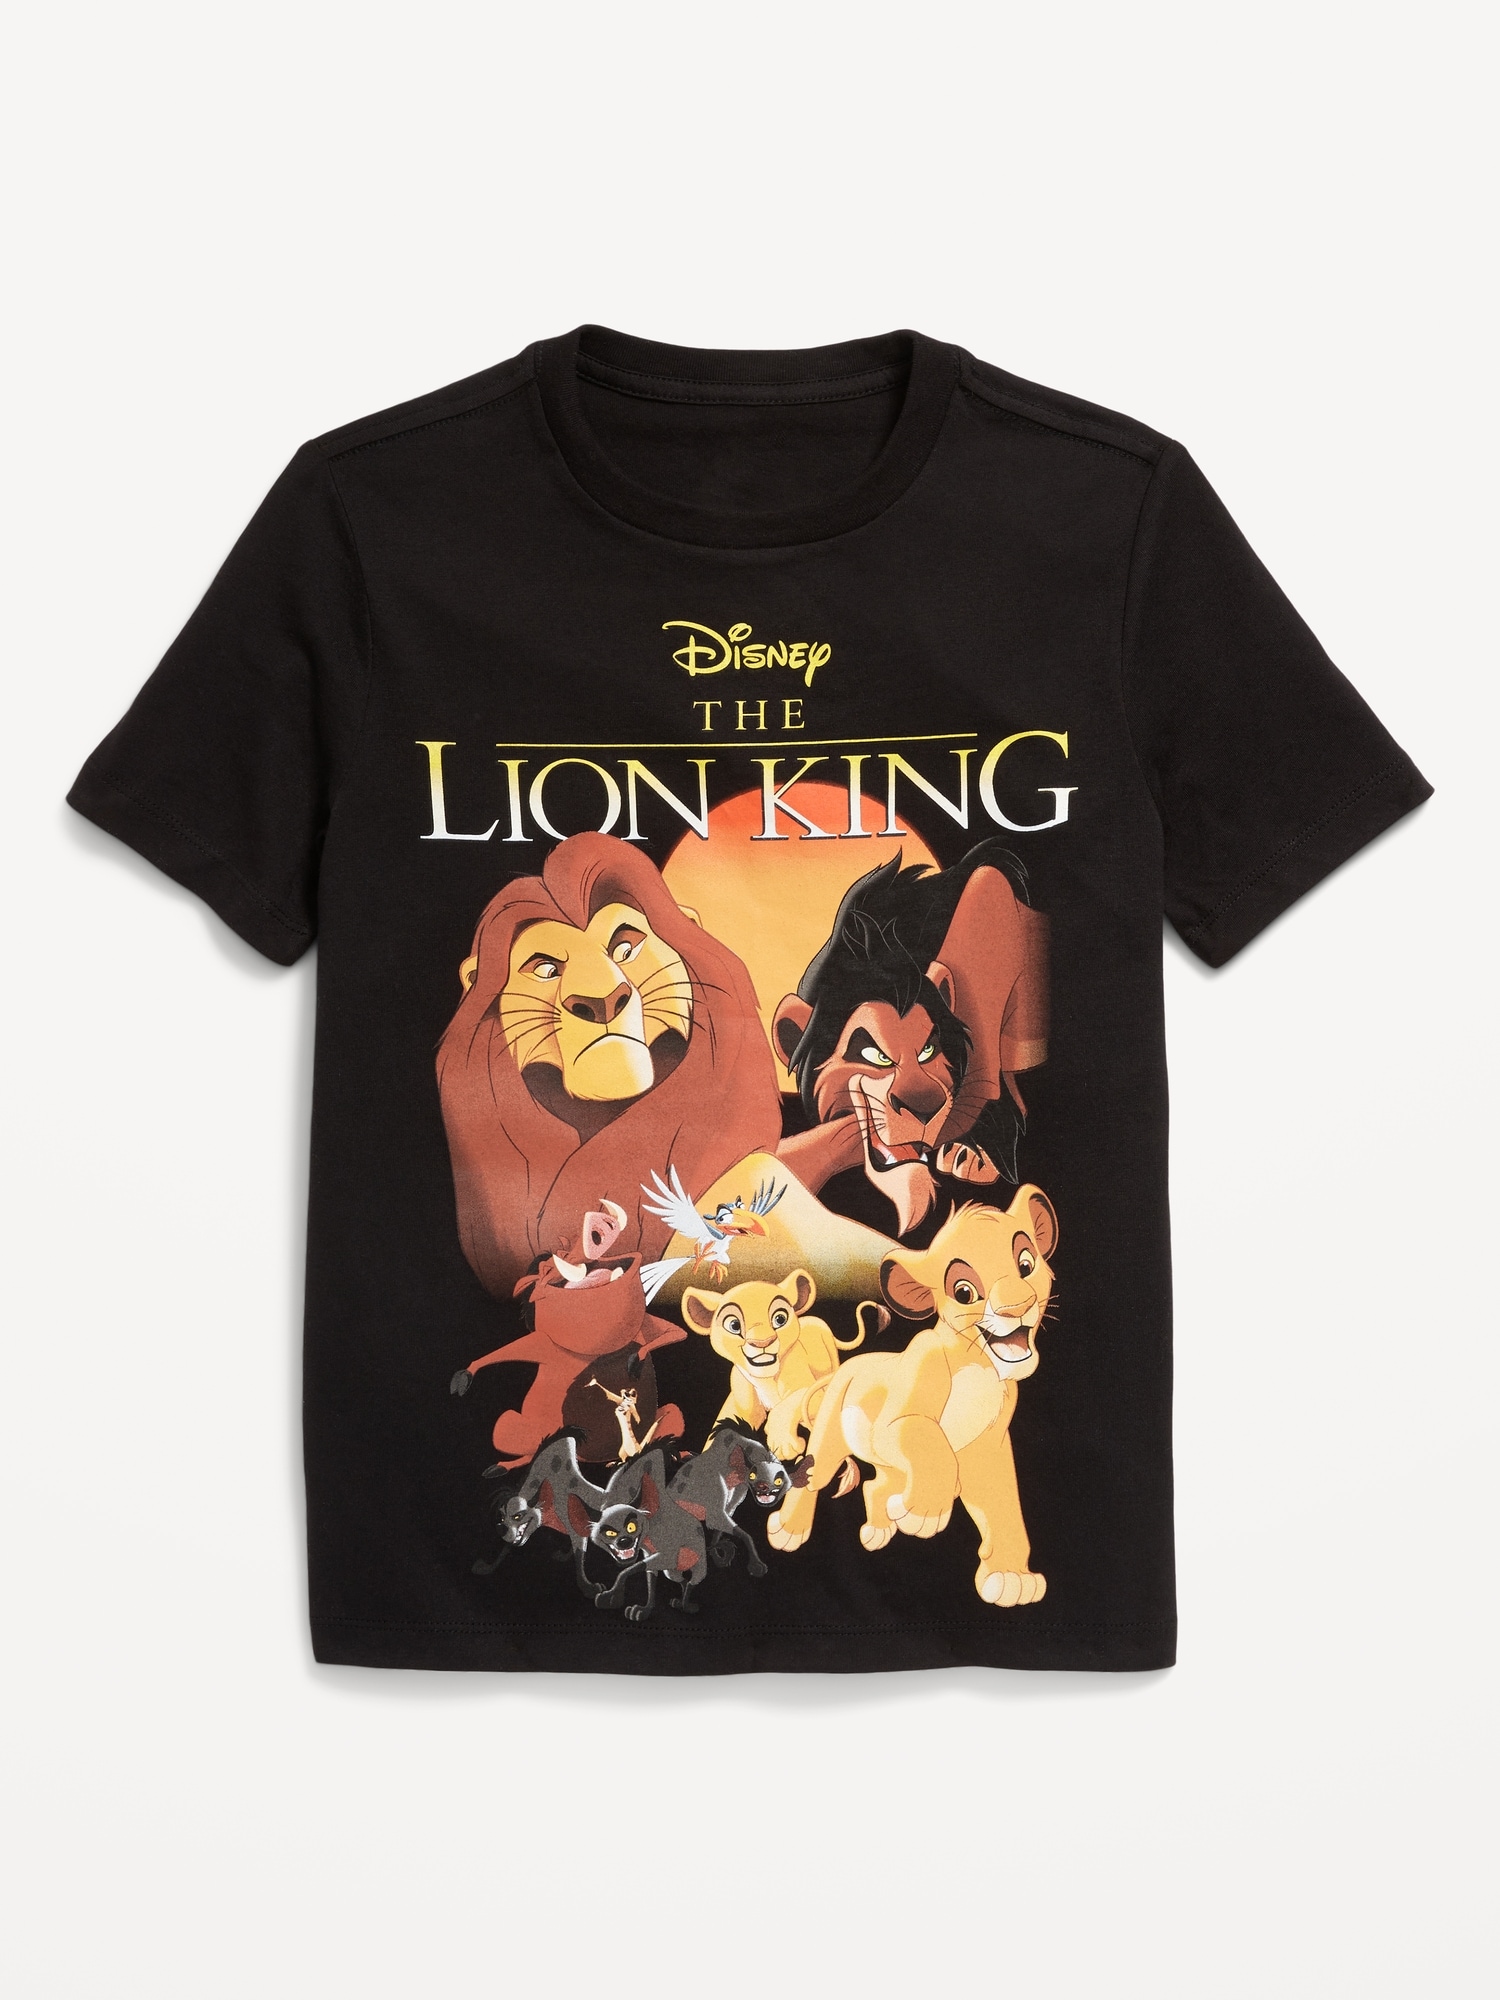 Disney The Lion King Gender-Neutral Graphic T-Shirt for Kids